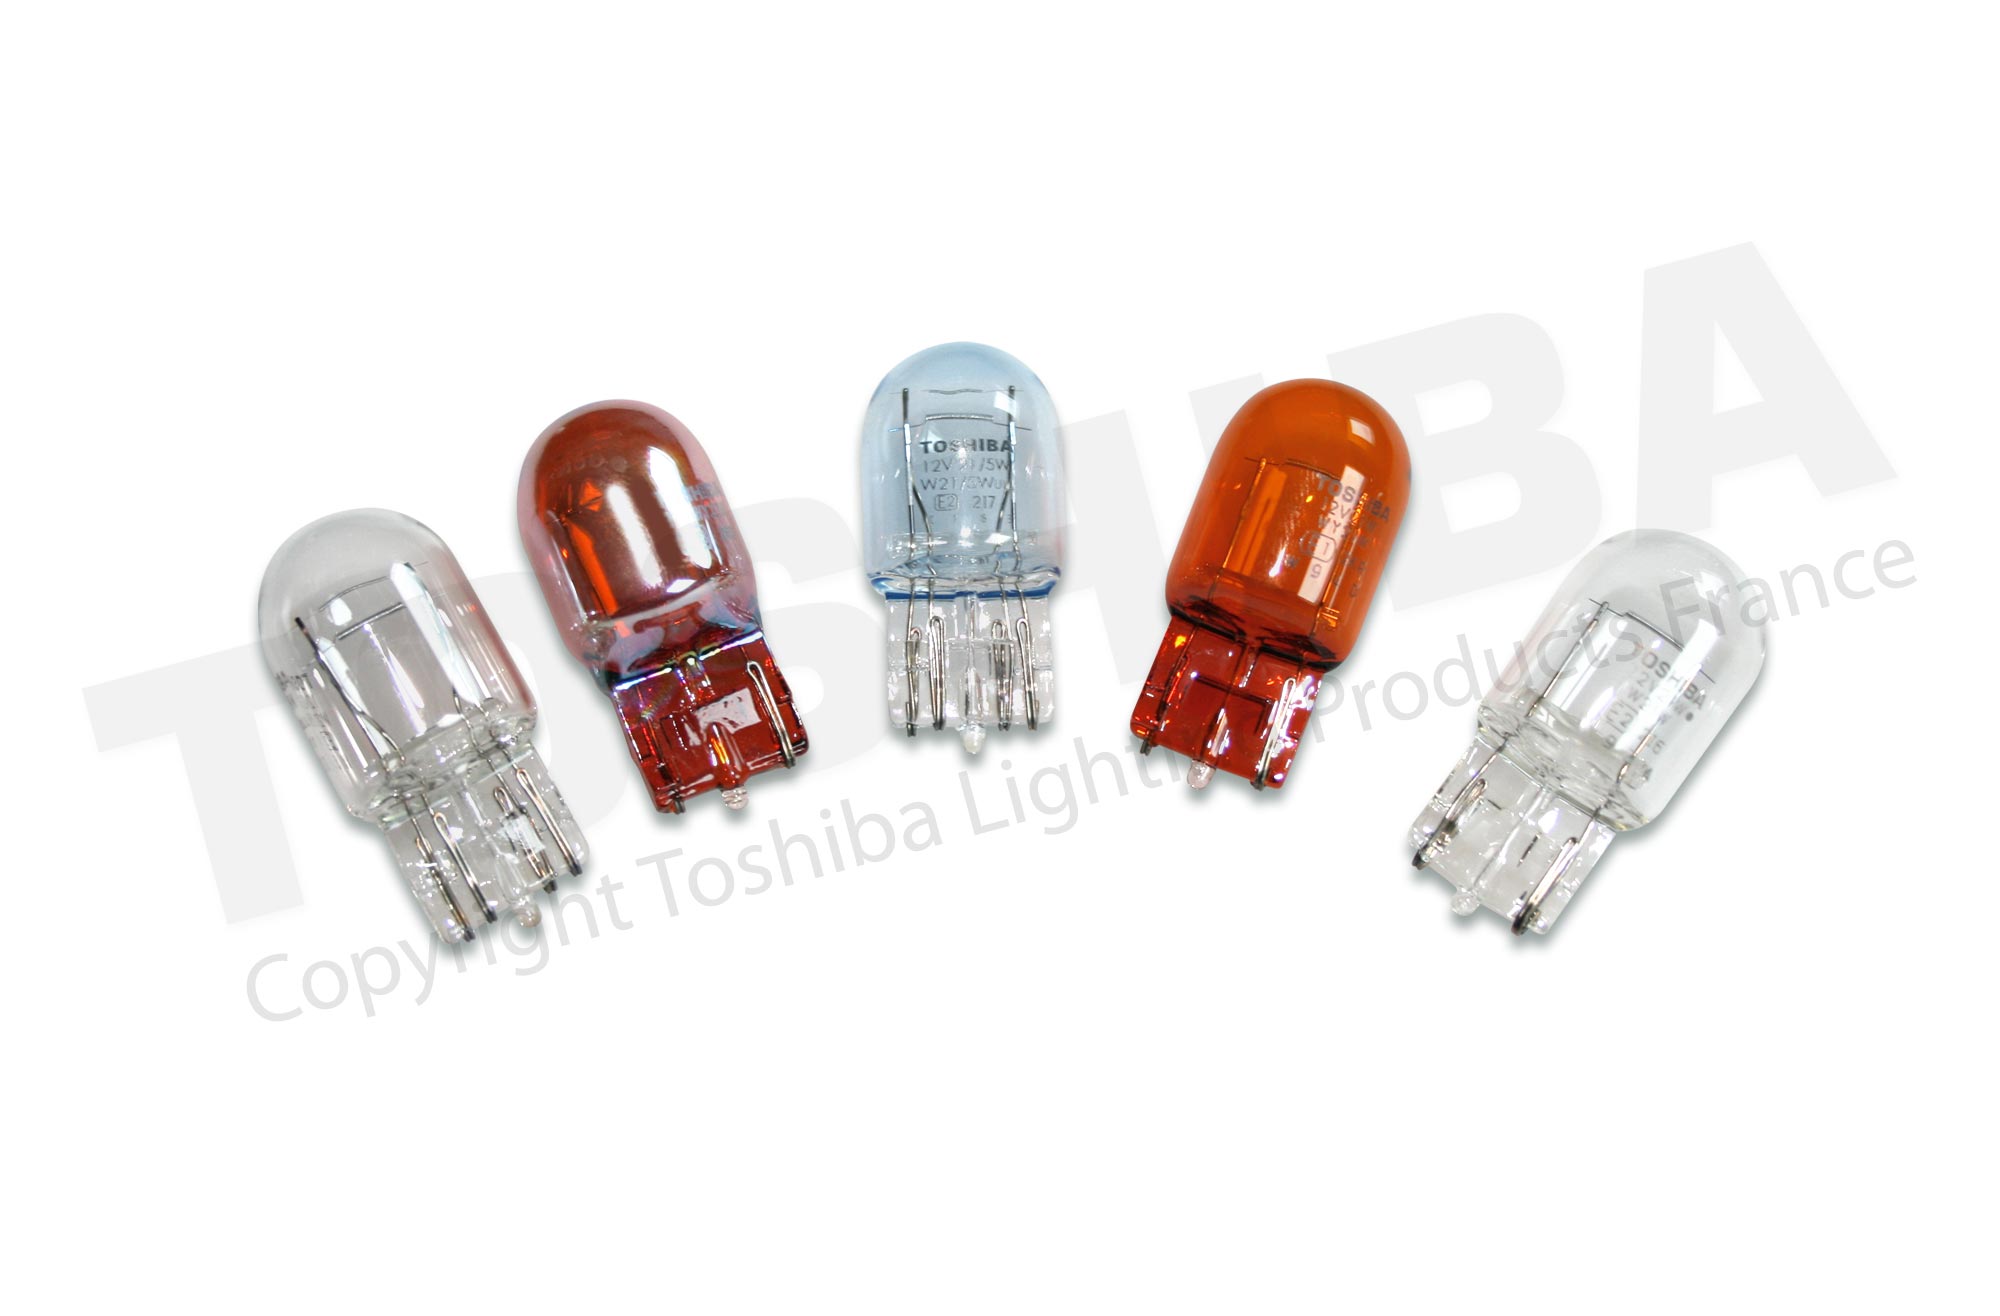 T20mm Wedge bulbs ECE-R37 approved Toshiba Lighting